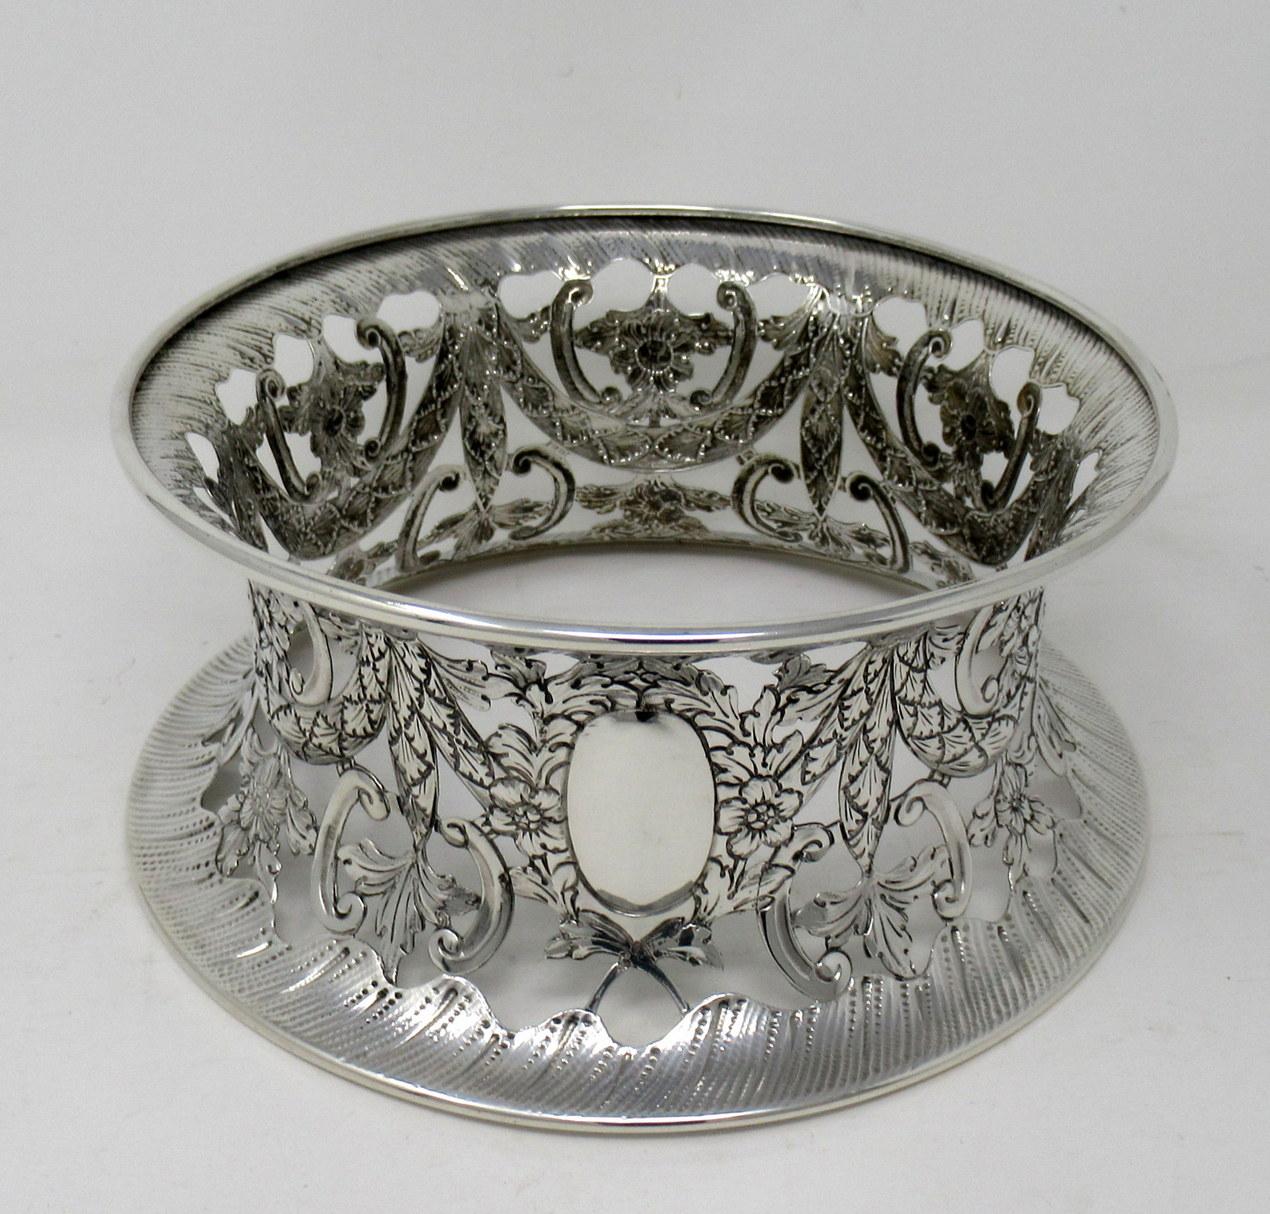 An exquisite Georgian style sterling silver English heavy Gauge table dish ring of traditional waisted form and unusually large size. 

The circular inverted sided lavish pierced body depicting chased garlands and swags with flowers. The central